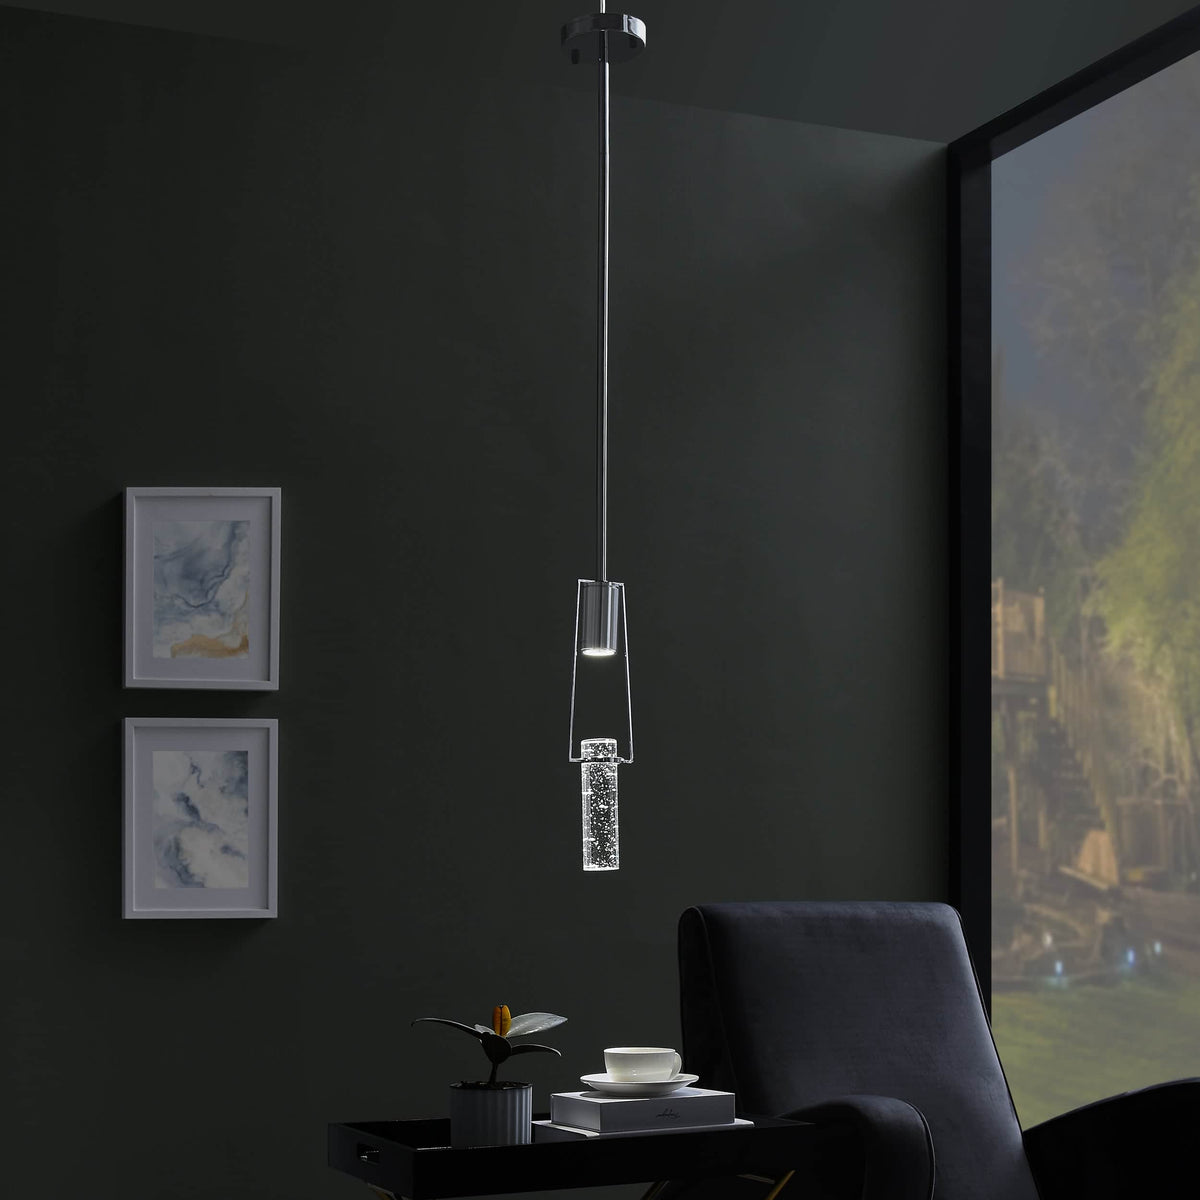 Harmony Single Chrome Pendant light used over side table for reading